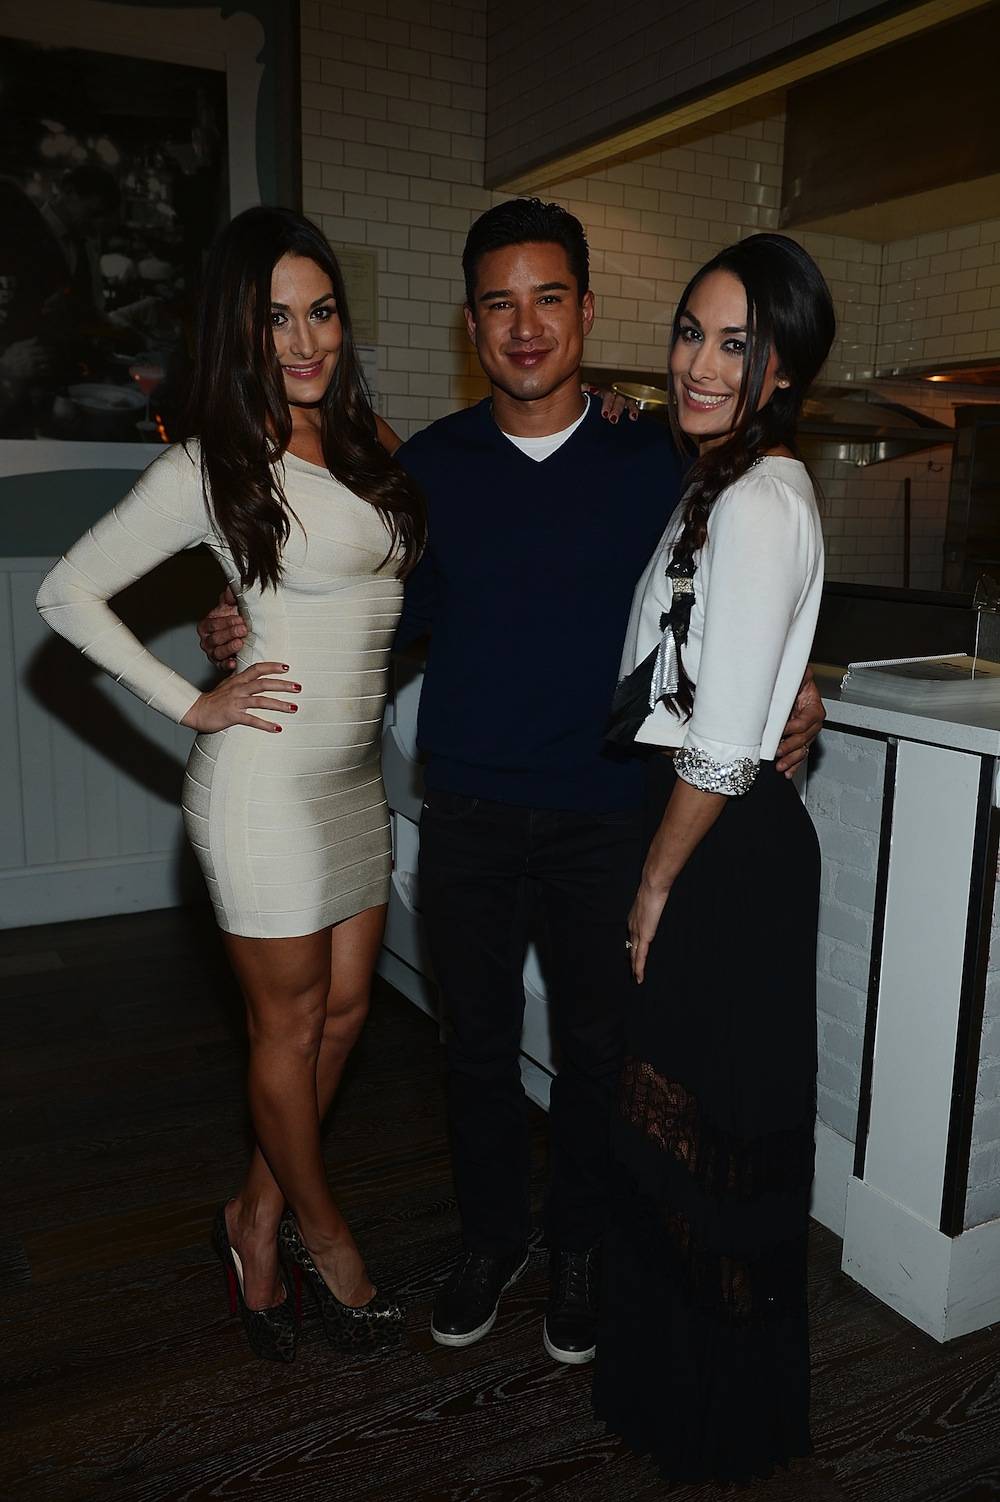 Mario Lopez And The Bella Twins Celebrate Sugar Factory's Grand Opening At Town Square Las Vegas